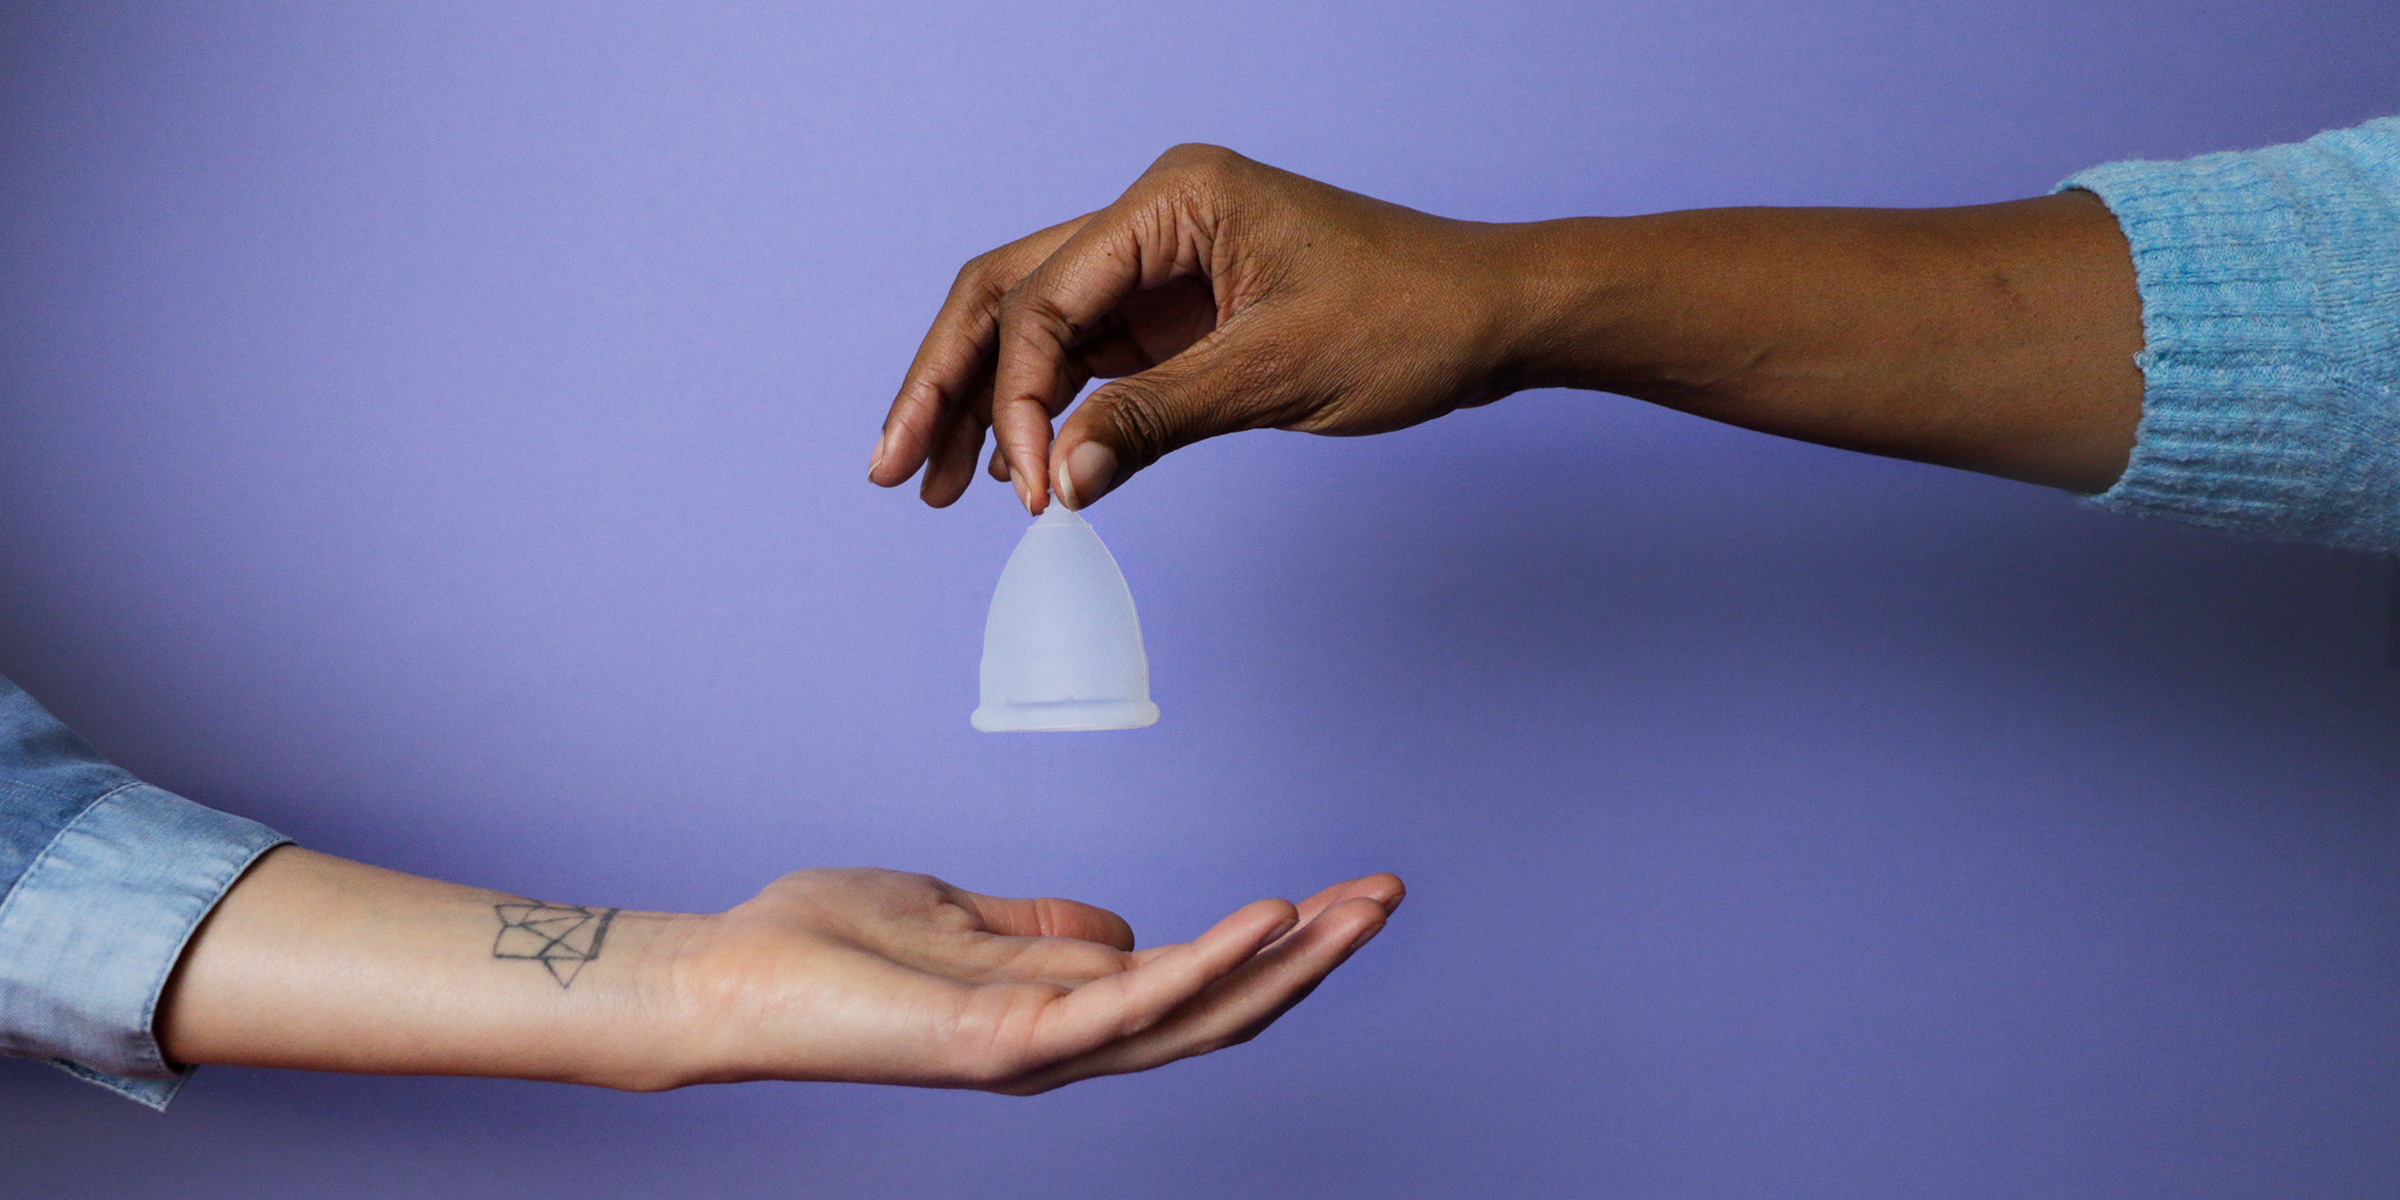 Do You Need A Size 1 or Size 2?  How to Choose Your Menstrual Cup Size 